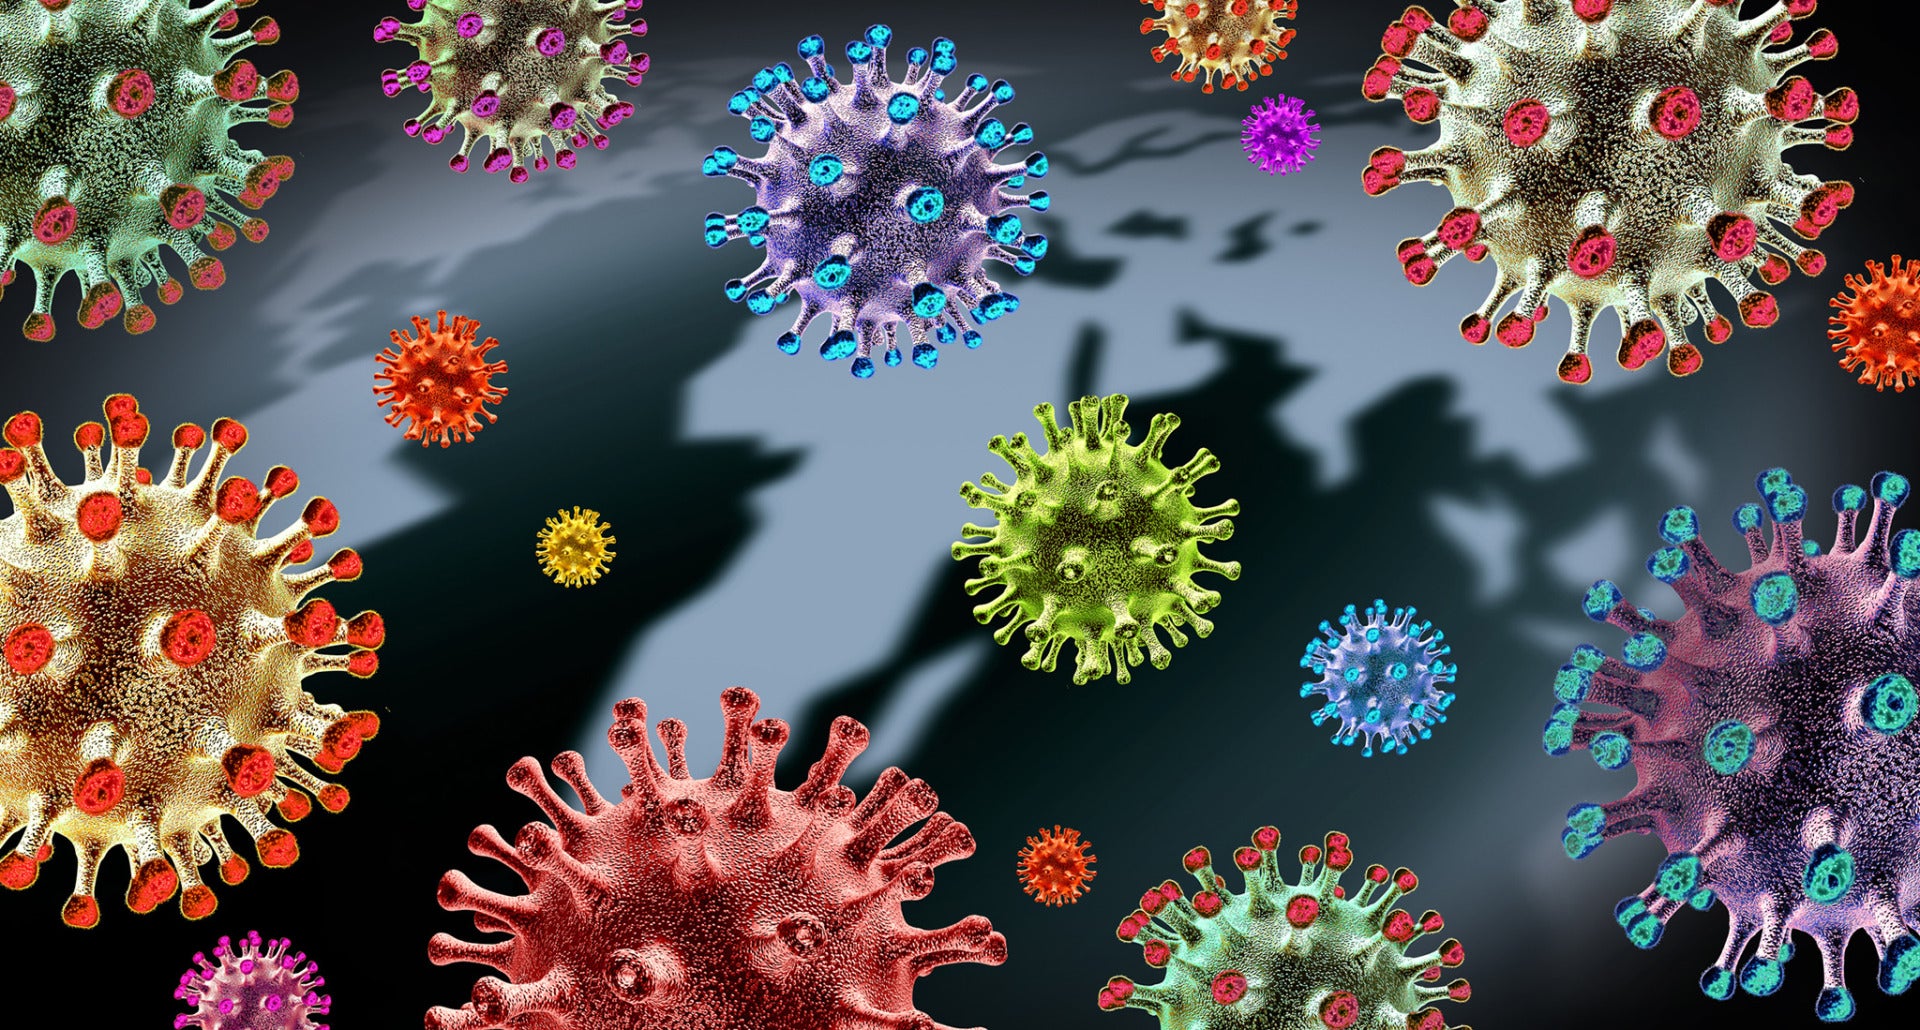 COVID Vaccines: The Latest on Variants and Breakthrough Infections